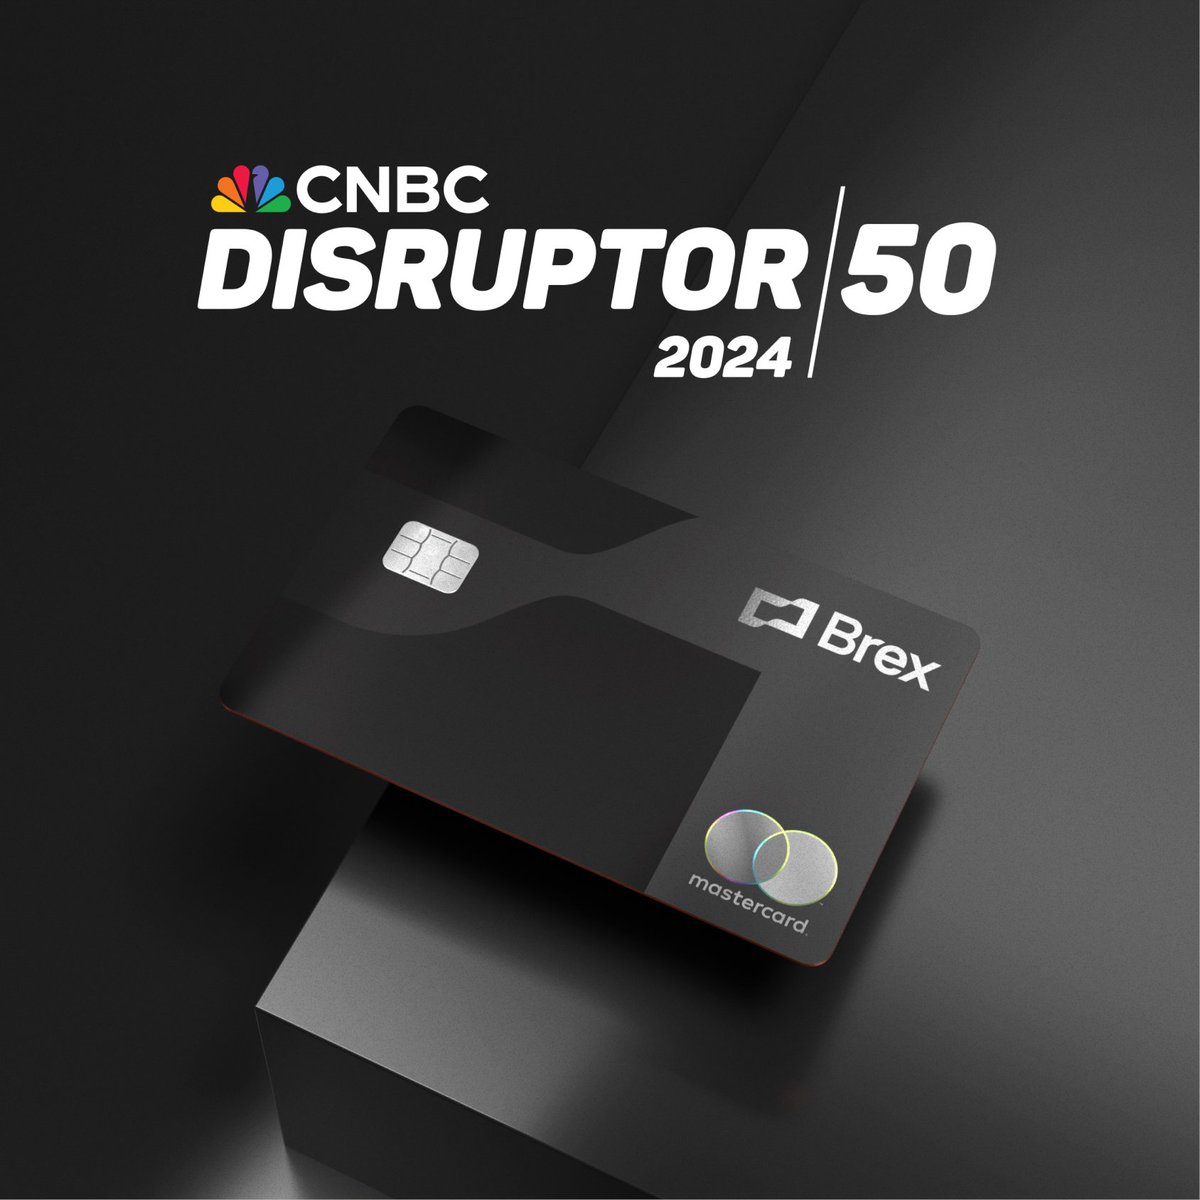 Big news today! The @CNBC Disruptor 50 recognized Brex for the 4th year in a row, landing us at #4 for 2024. From powering startups to keeping billions of dollars in policy for global enterprises, we love what we do and the best is yet to come. Congrats to our customers on the